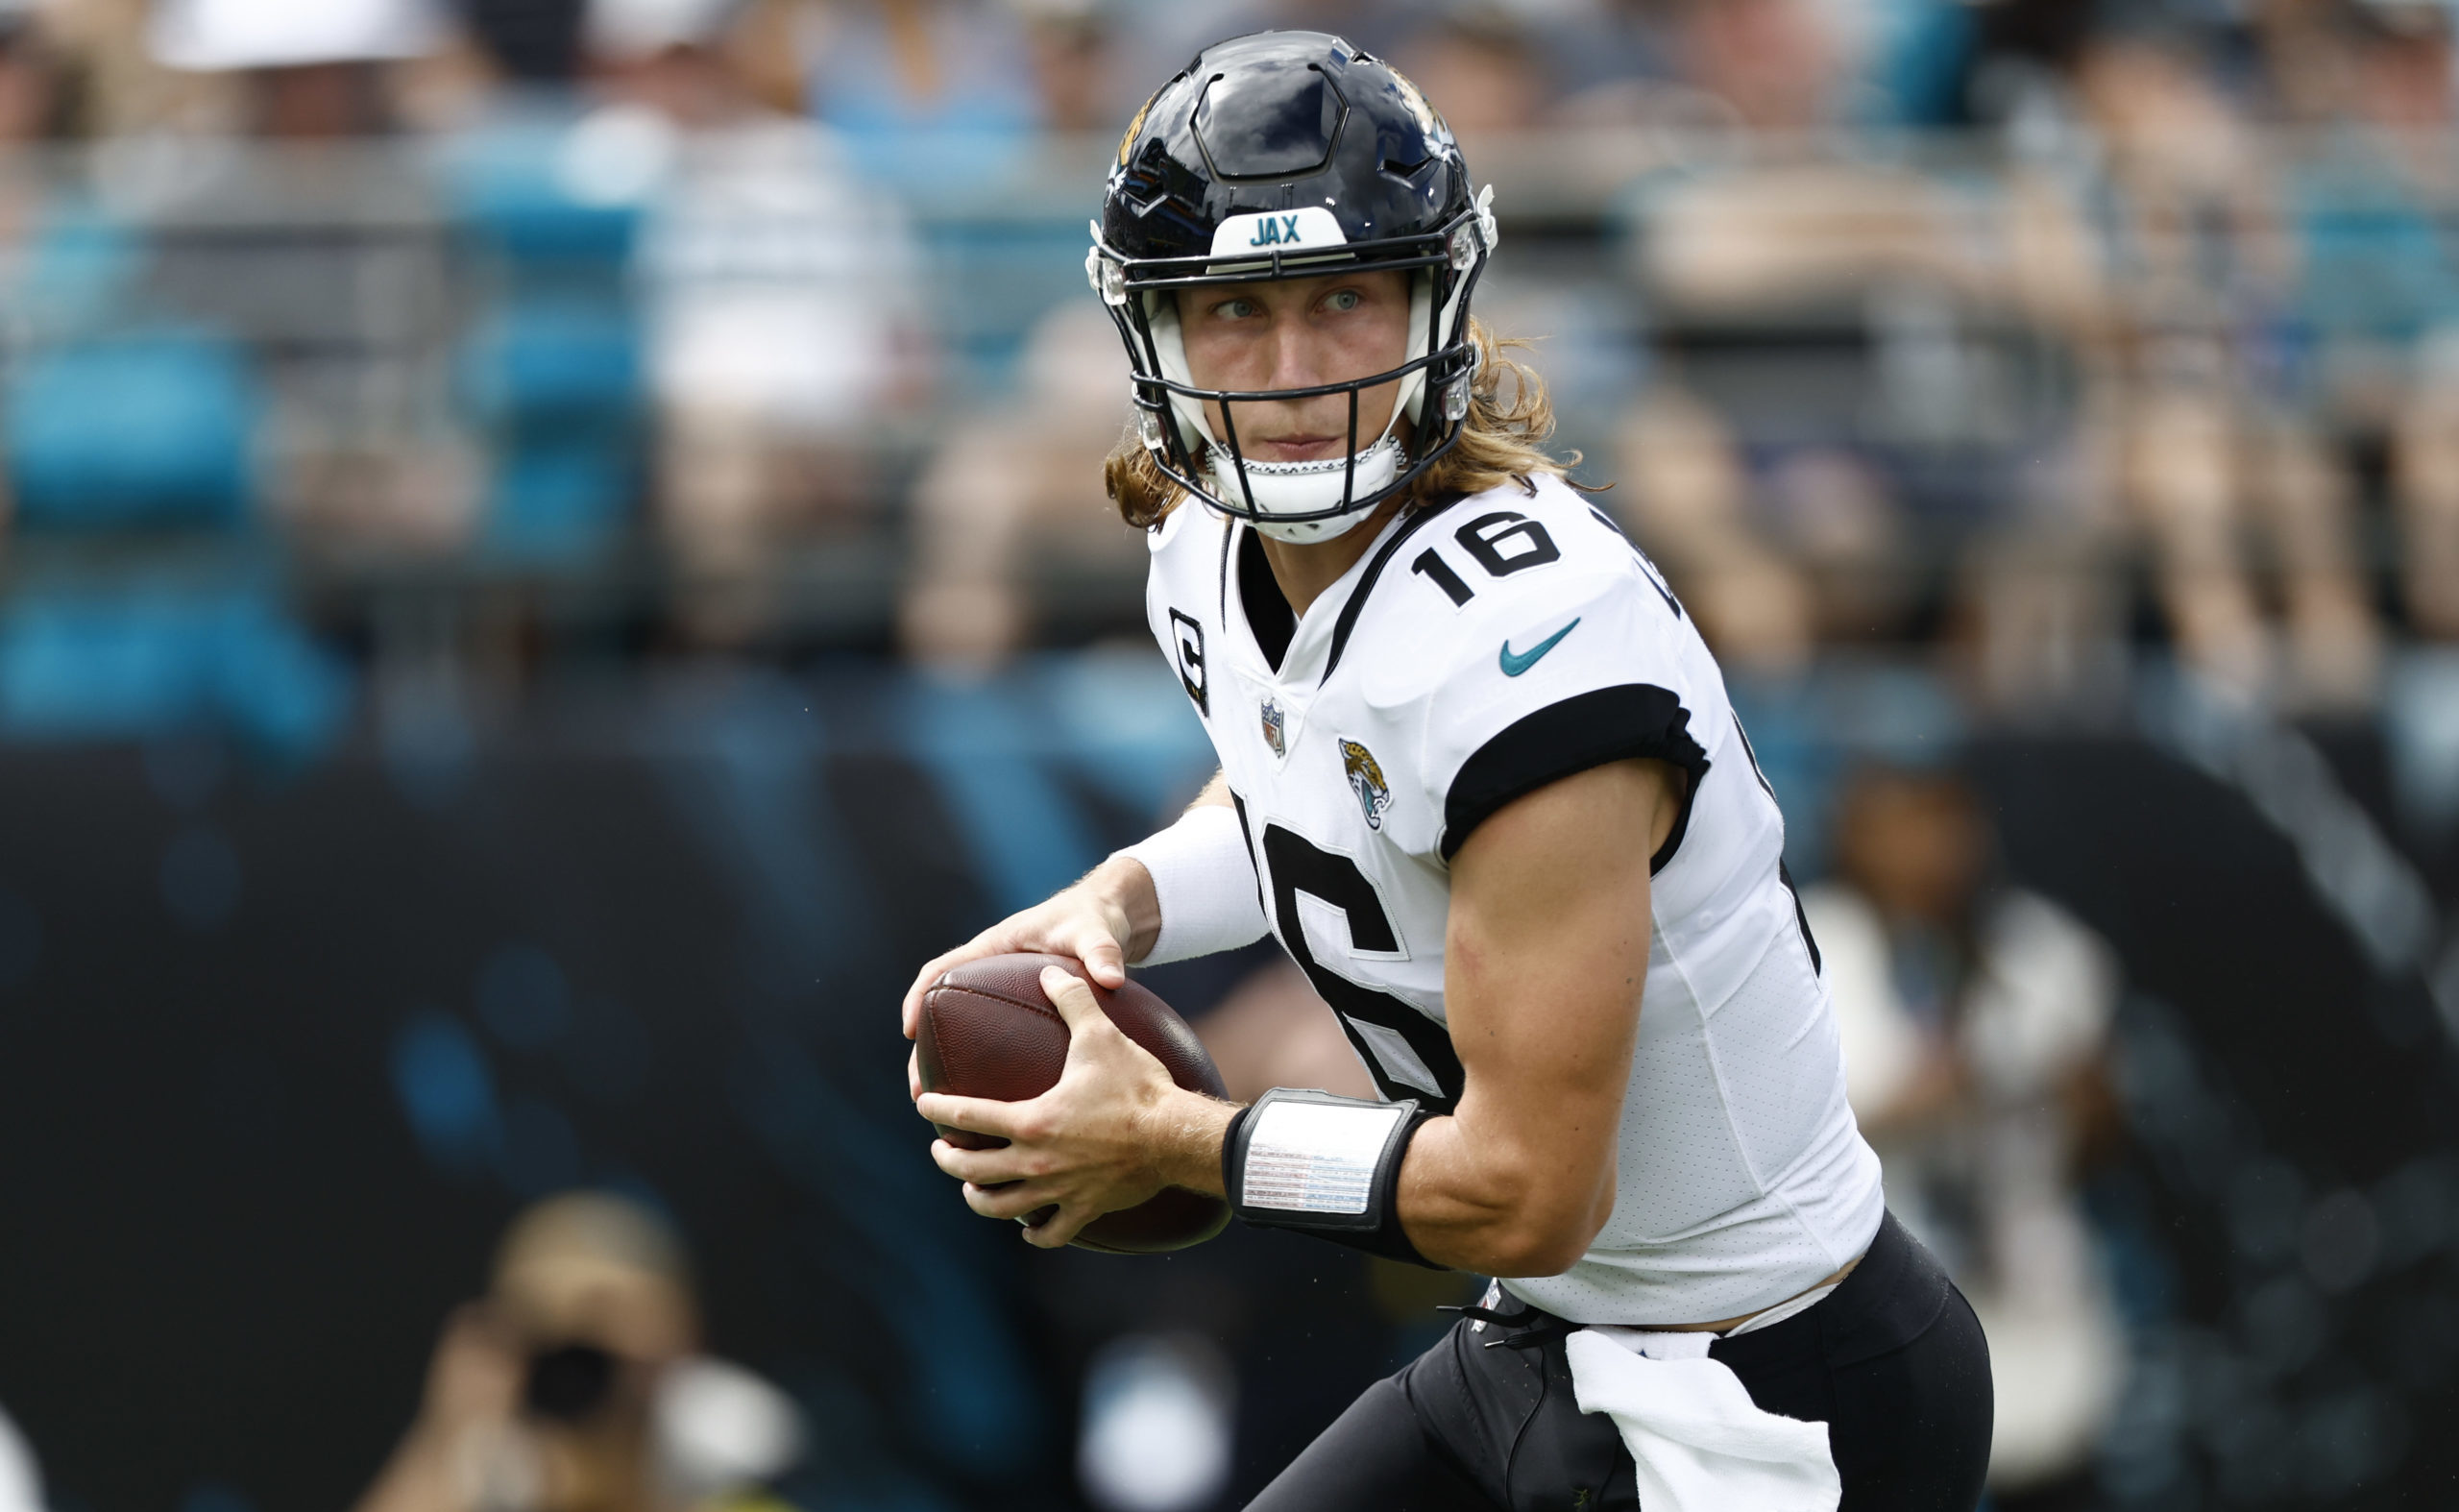 Jacksonville Jaguars ‘Look a Lot Better This Year’